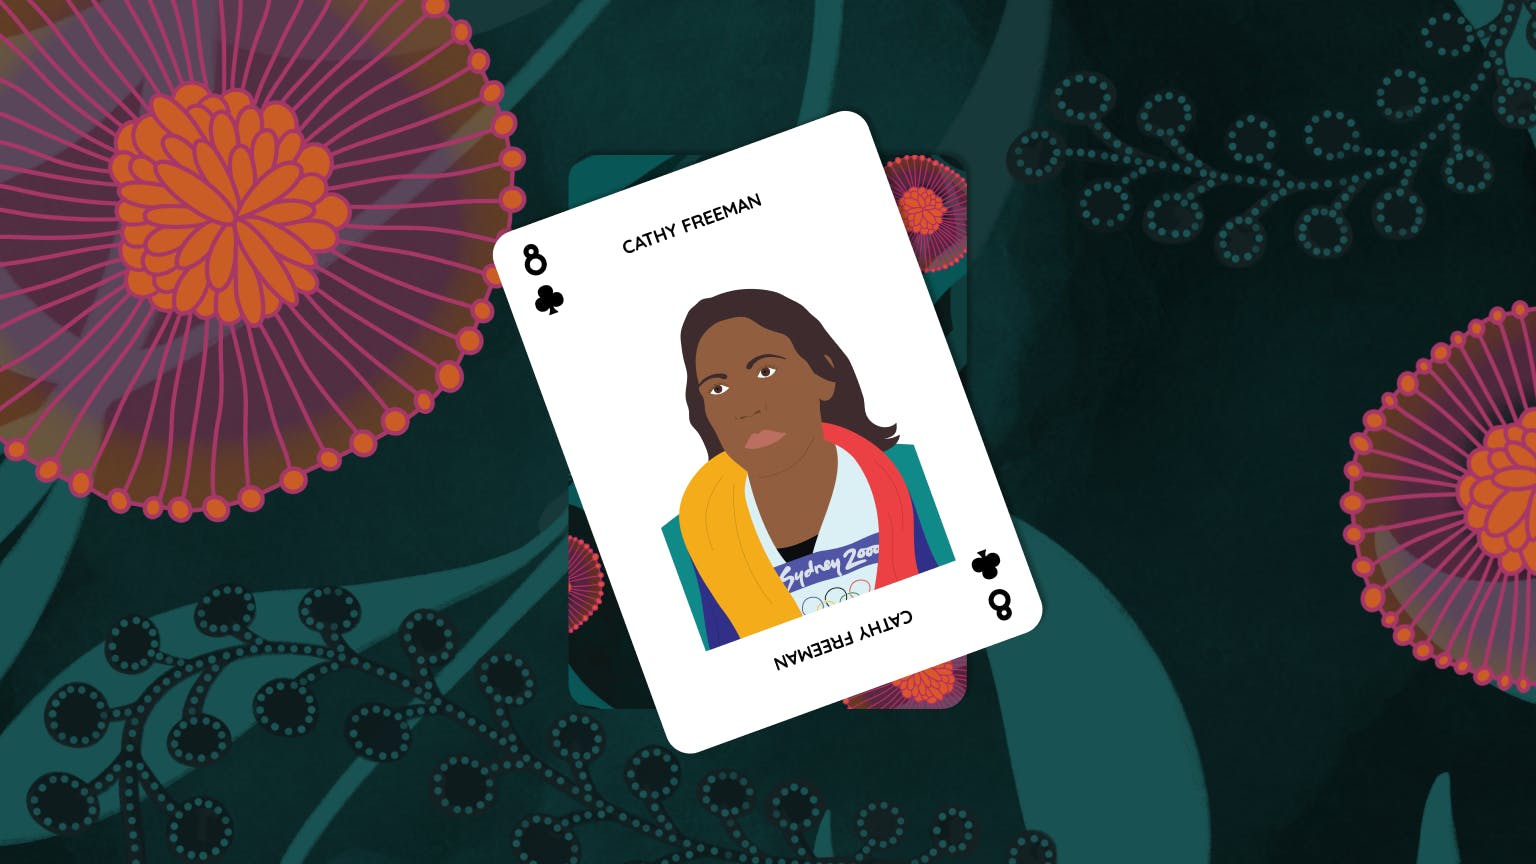 A playing card, the eight of hearts, sits on an angle above native flower patterns by Alysha Menzel. The card shows an illustrated version of Cathy Freeman at the Sydney 2000 Olympics.